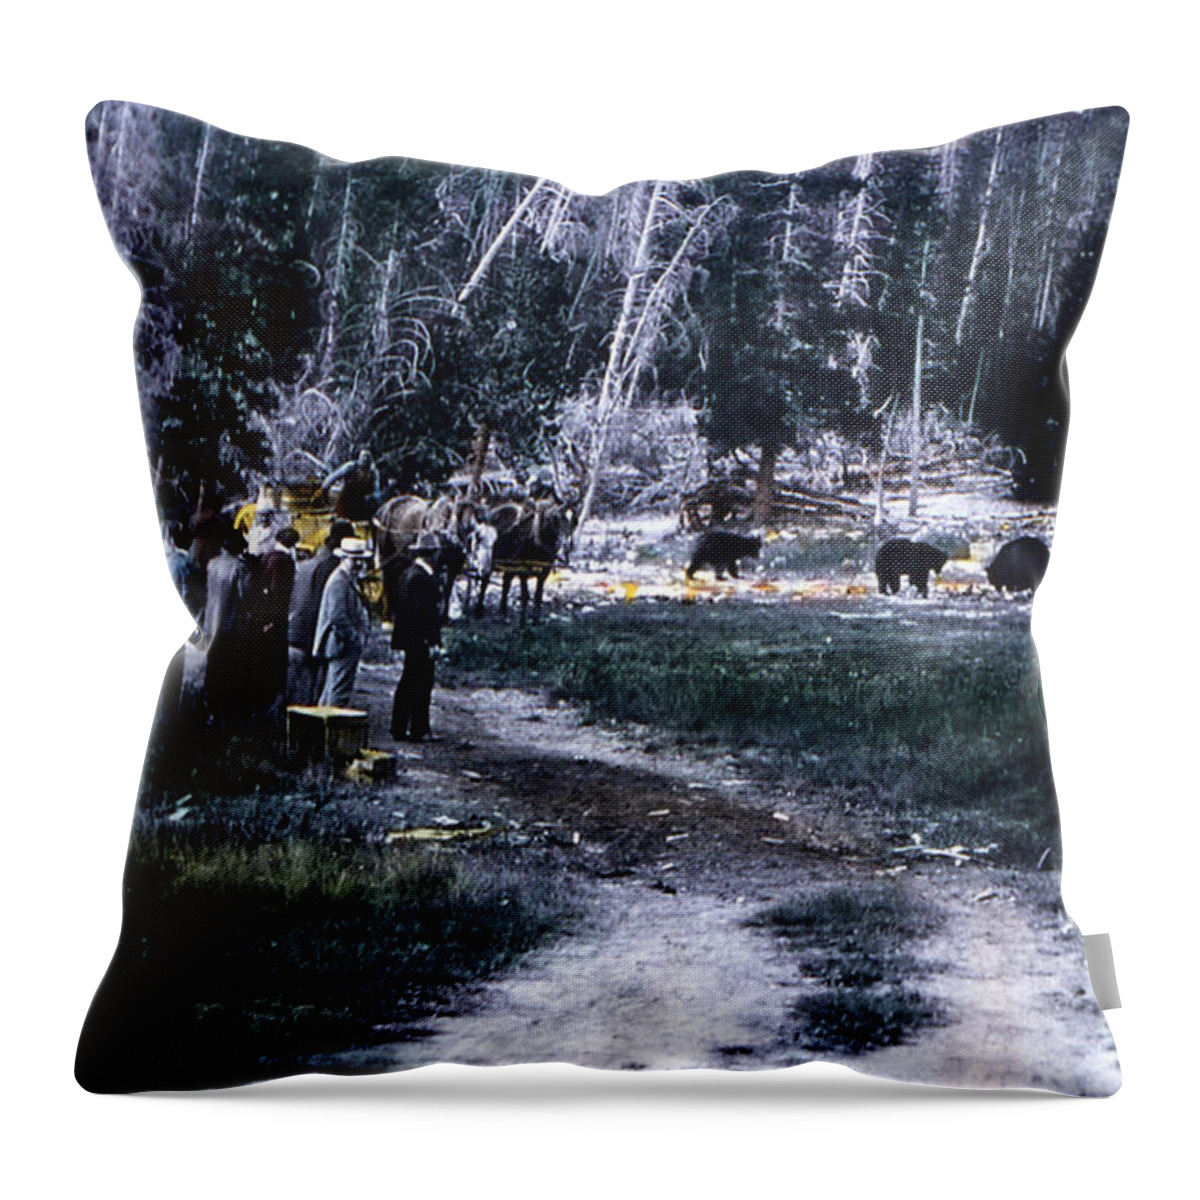 History Throw Pillow featuring the photograph Tourists Feeding Bear Yellowstone Np by NPS Photo JP Clum